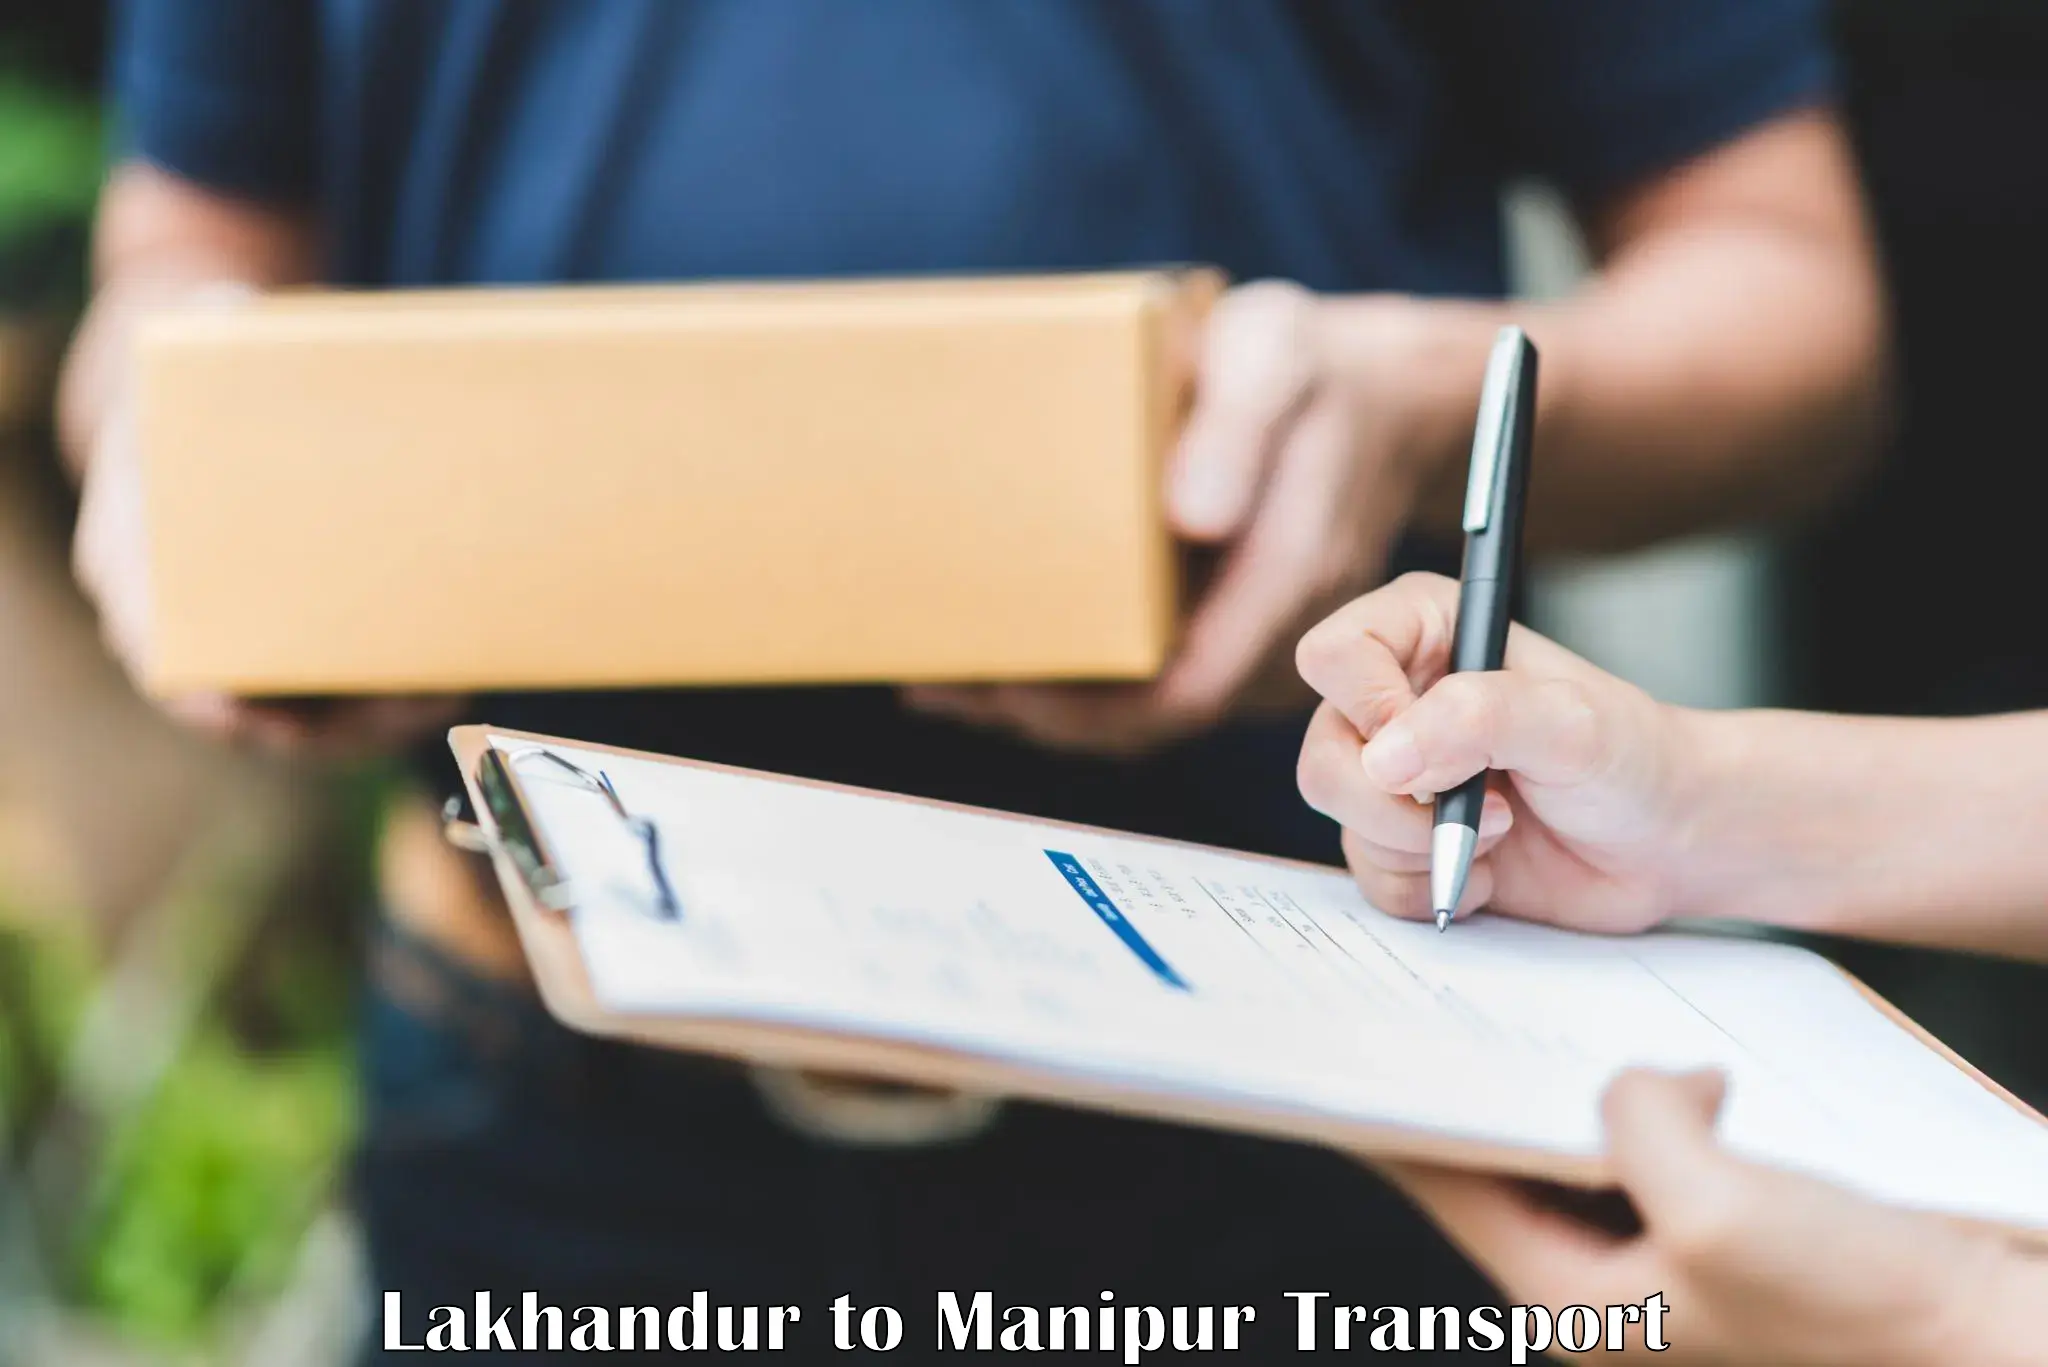 Nationwide transport services Lakhandur to Manipur